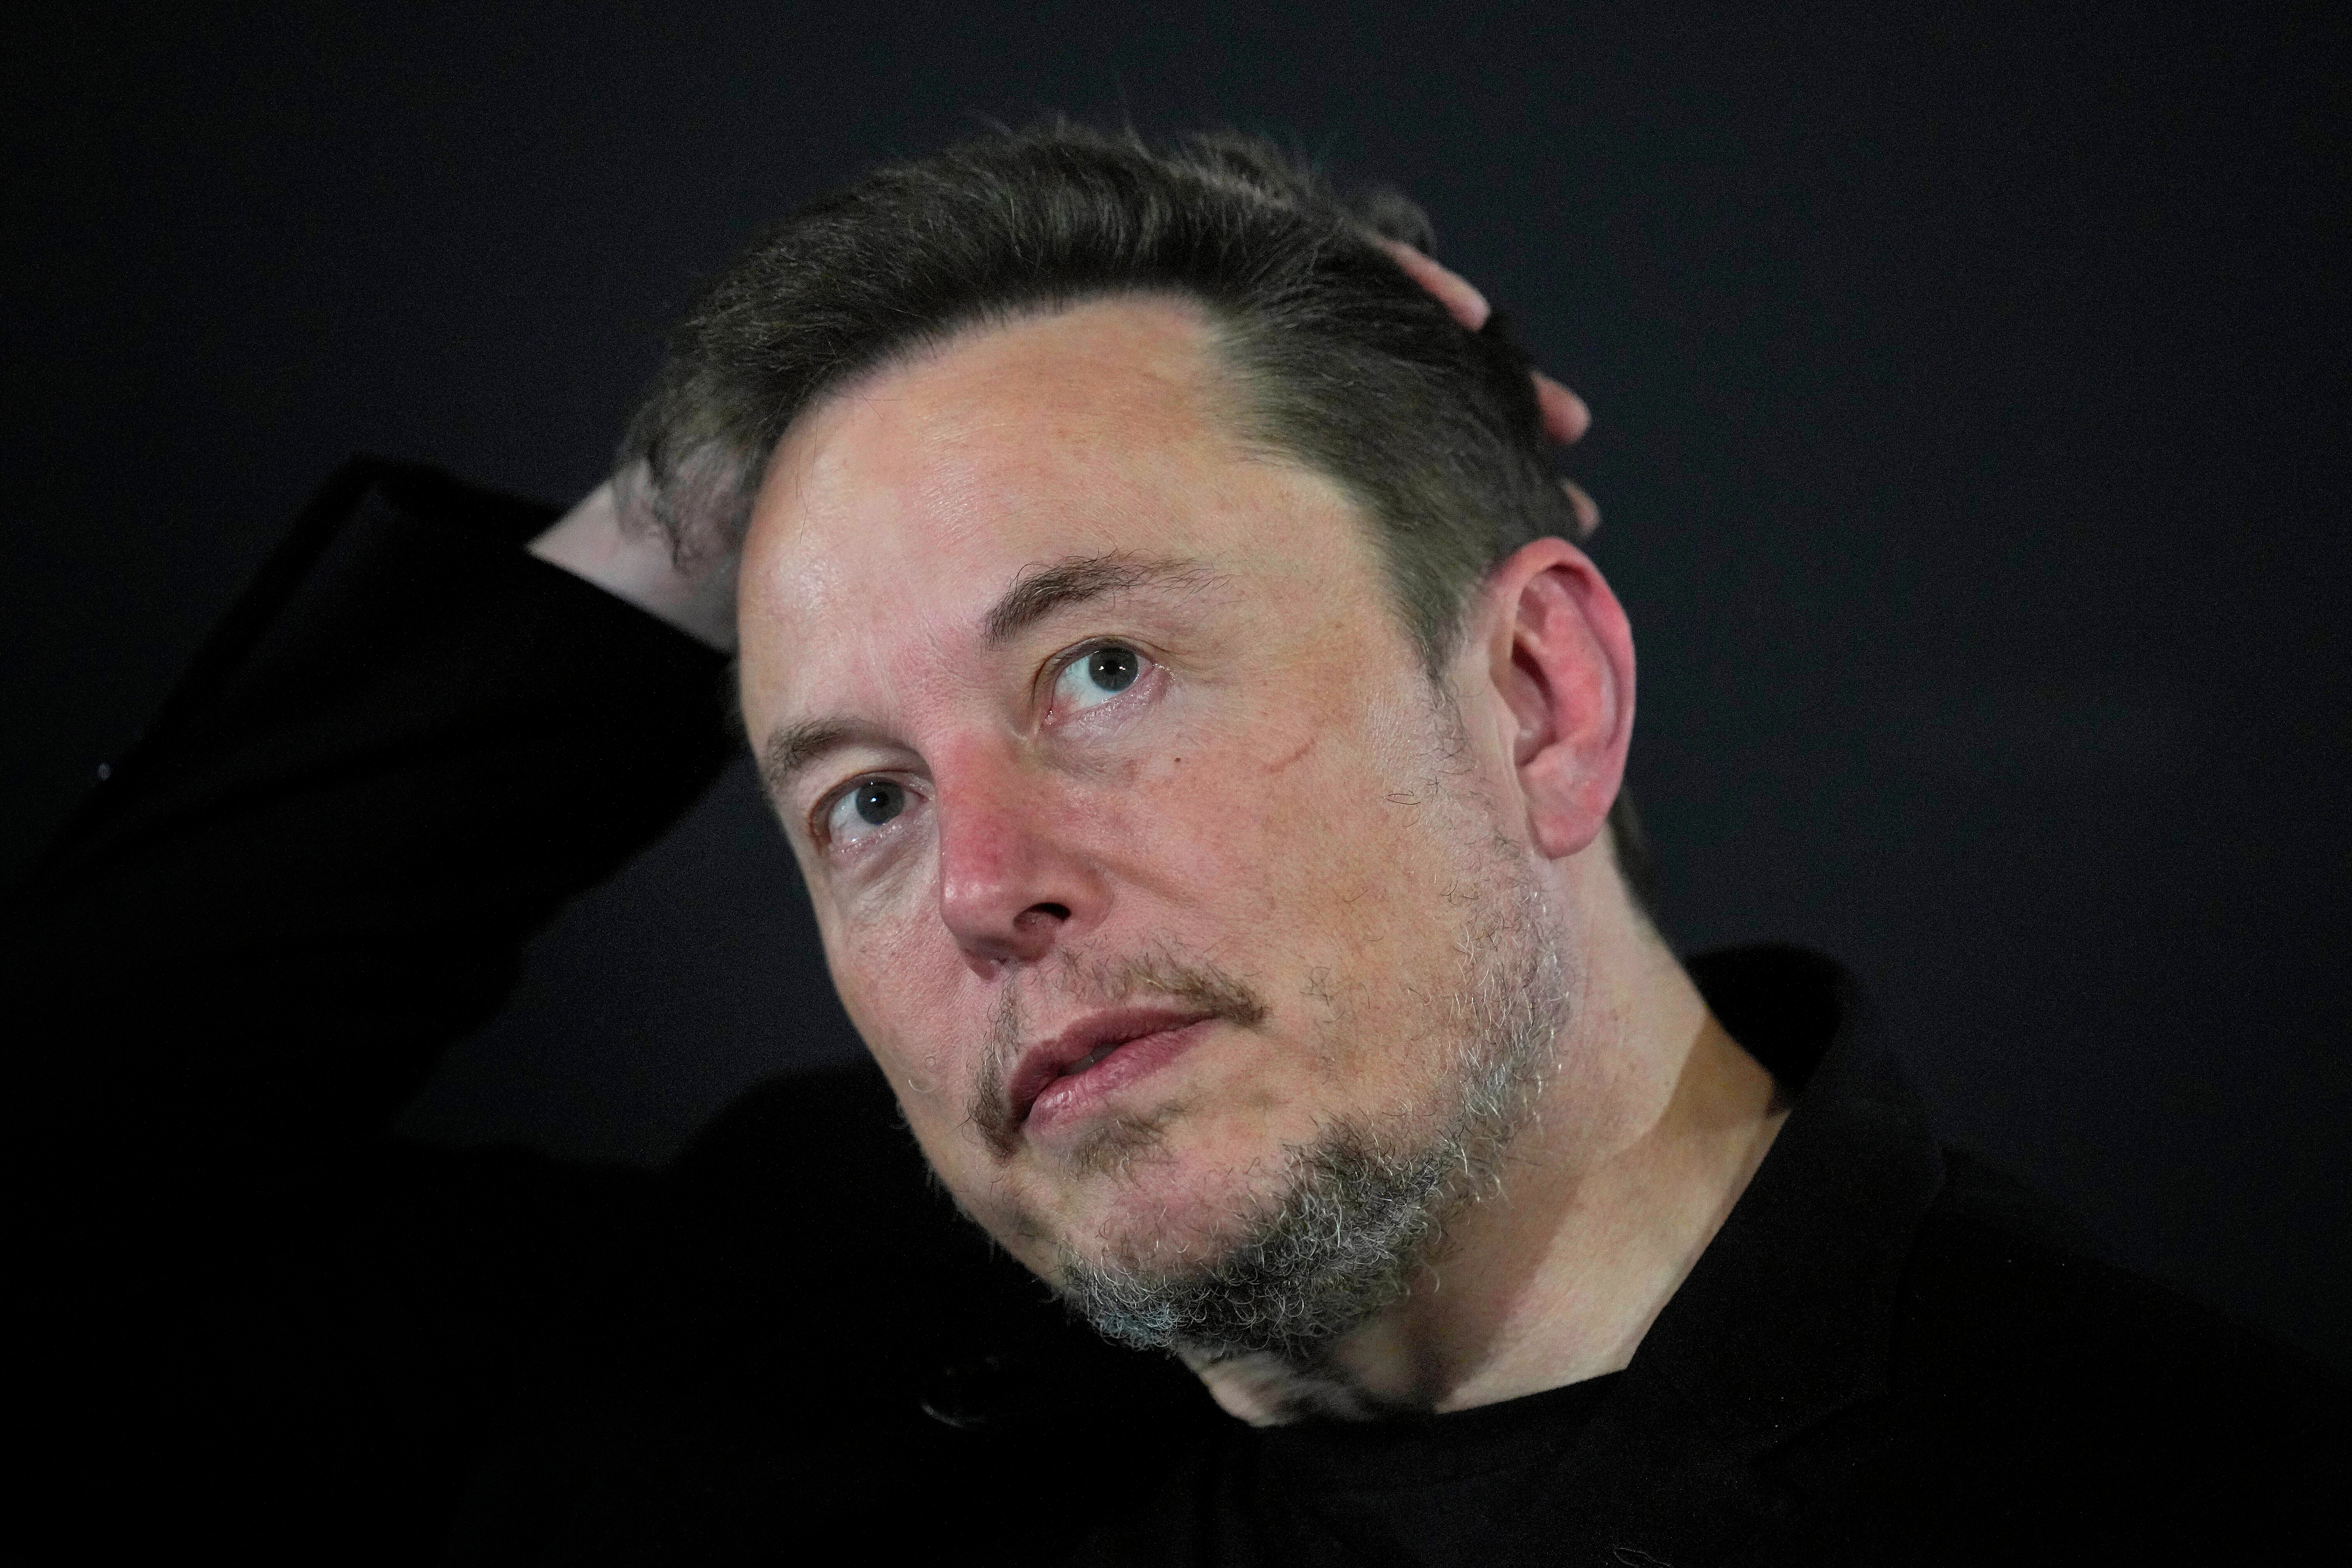 Elon Musk has asked the Supreme Court to undo a settlement agreement